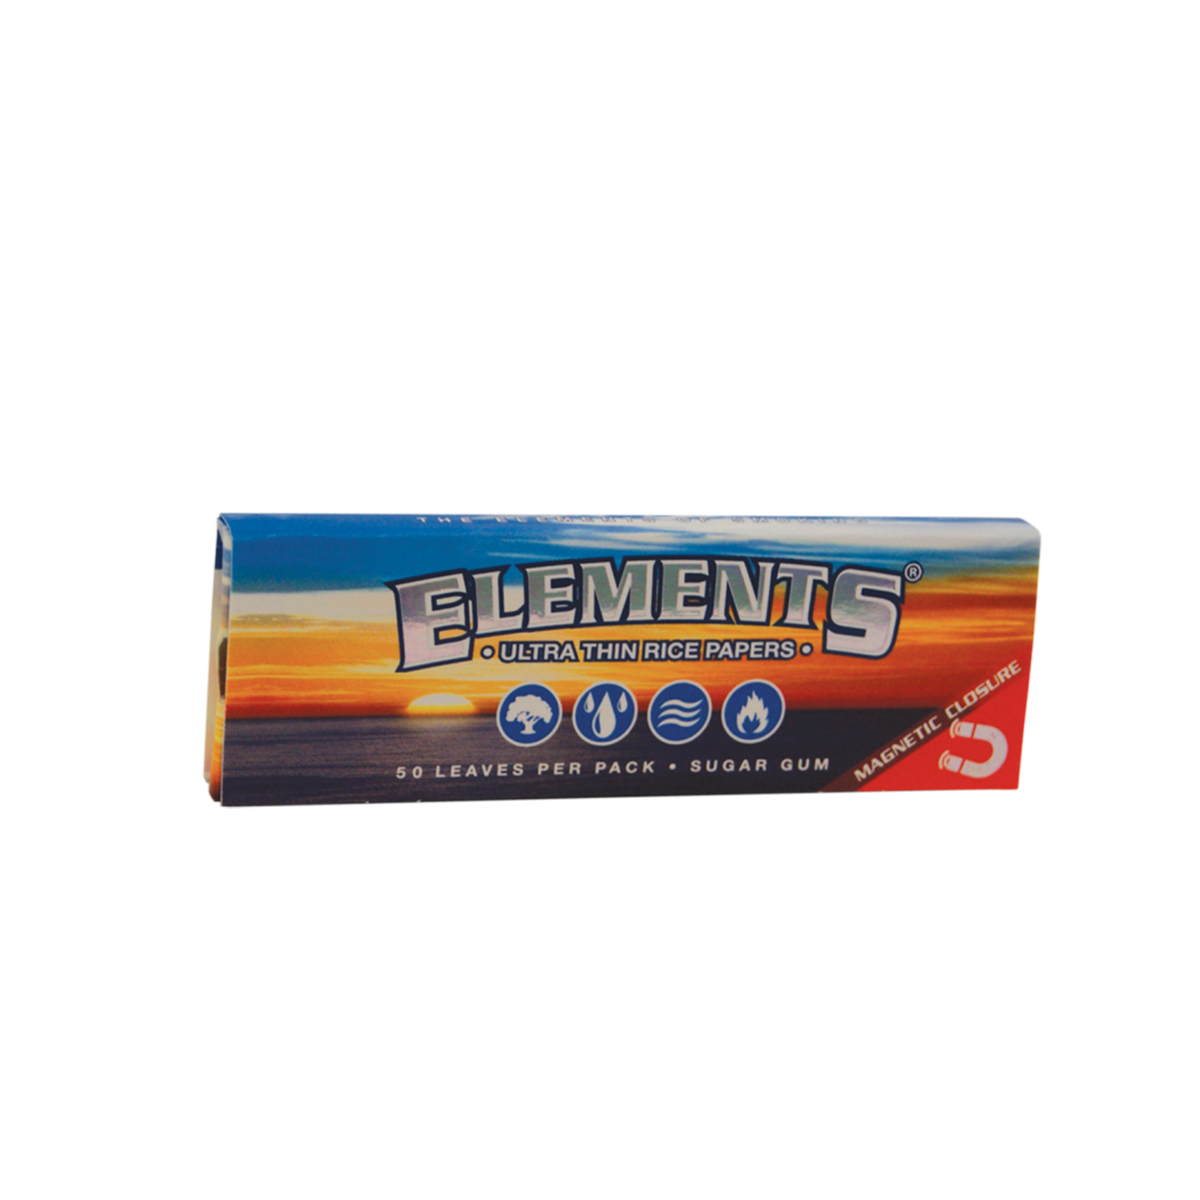 Elements 1.25 Rice Papers